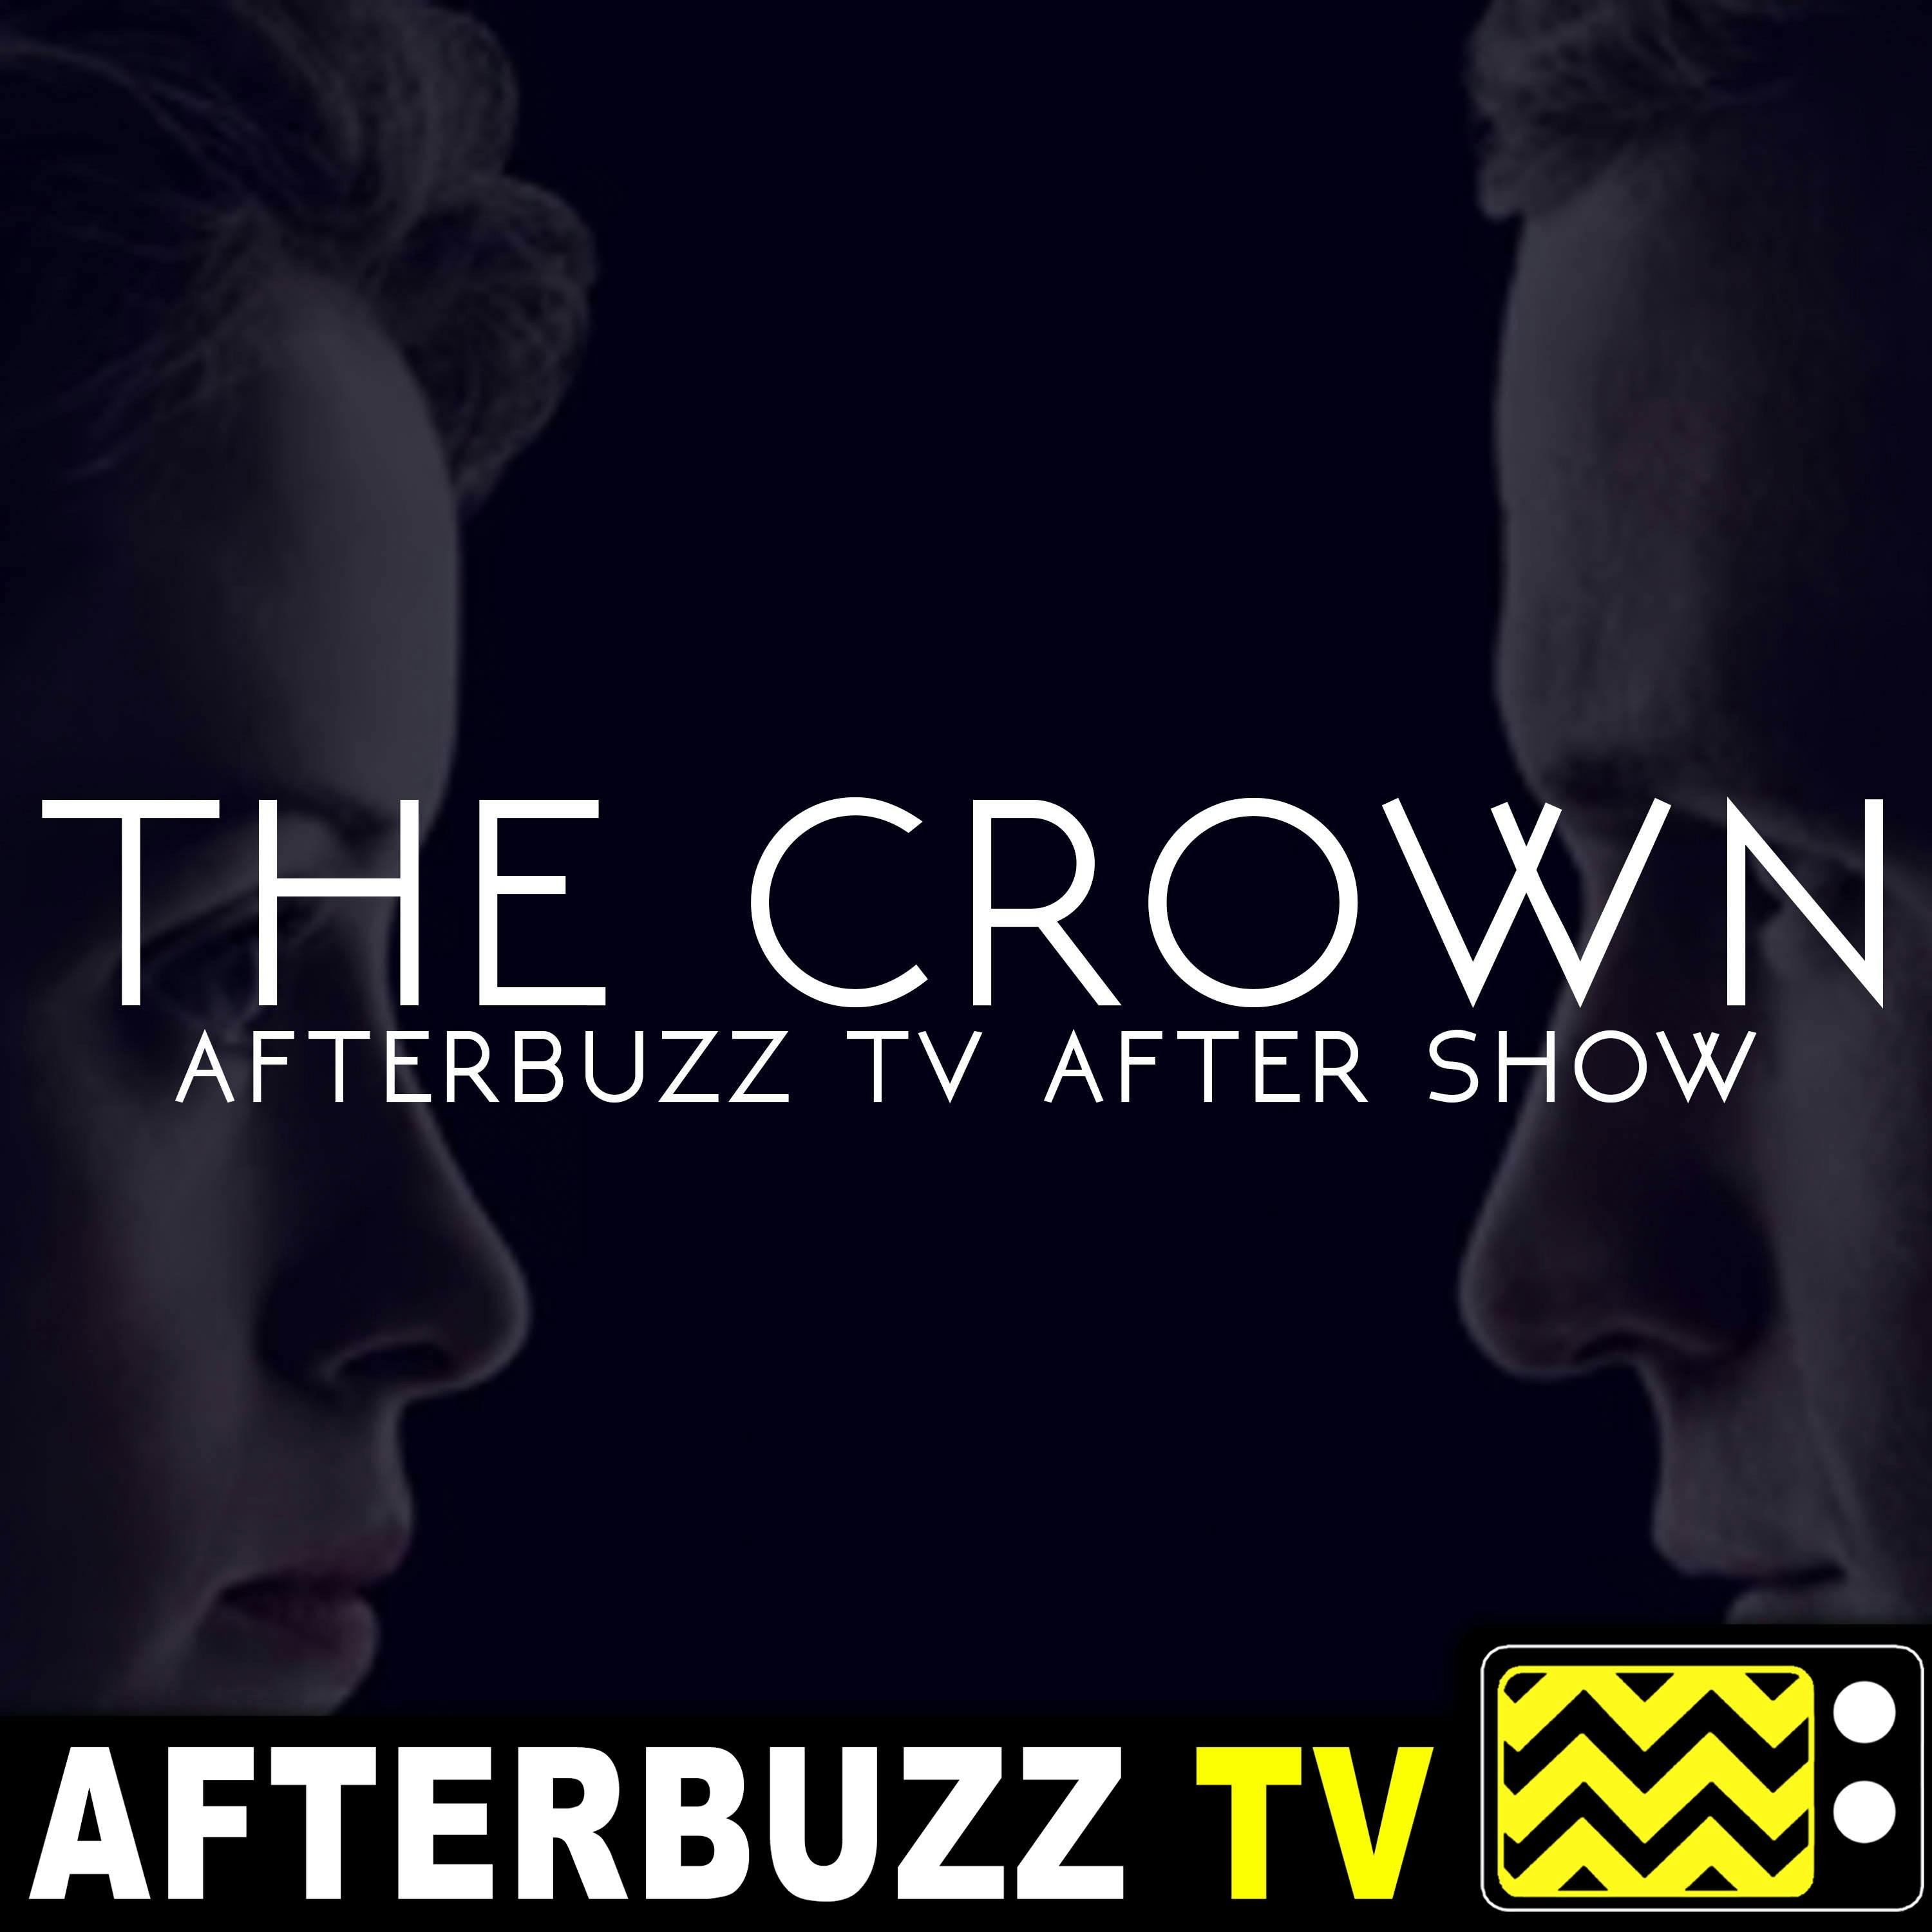 The Crown S:2 | Misadventure; A Company Of Men E:1 & E:2 | AfterBuzz TV AfterShow